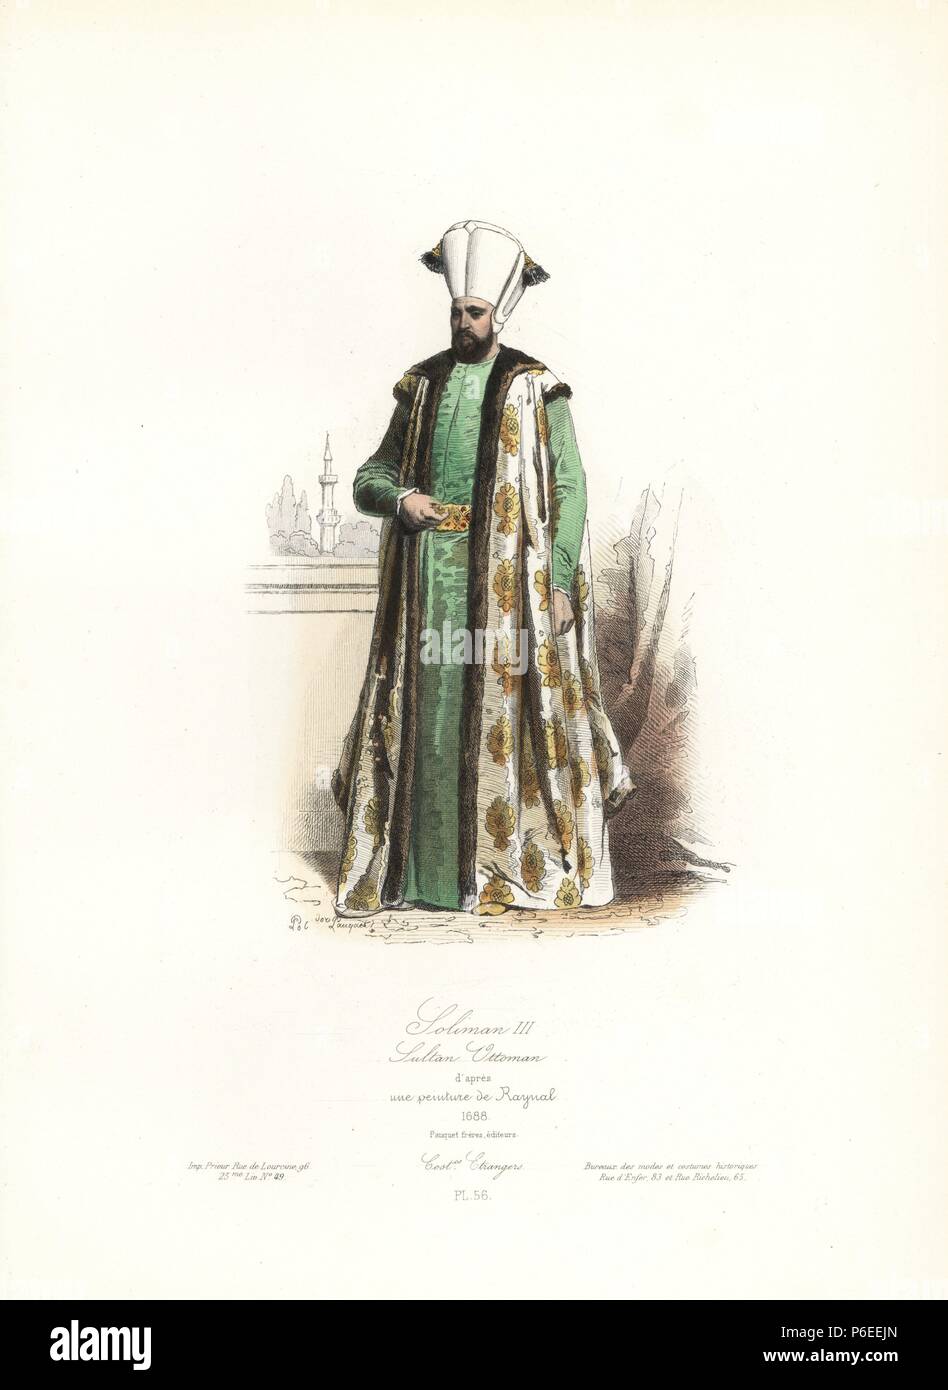 Sultan Suleiman III, after a painting by Raynal, 17th century. Handcoloured steel engraving by Polydor Pauquet from the Pauquet Brothers' 'Modes et Costumes Etrangers Anciens et Modernes' (Foreign Fashions and Costumes Ancient and Modern), Paris, 1865. Hippolyte (b. 1797) and Polydor Pauquet (b. 1799) ran a successful publishing house in Paris in the 19th century, specializing in illustrated books on costume, birds, butterflies, anatomy and natural history. Stock Photo